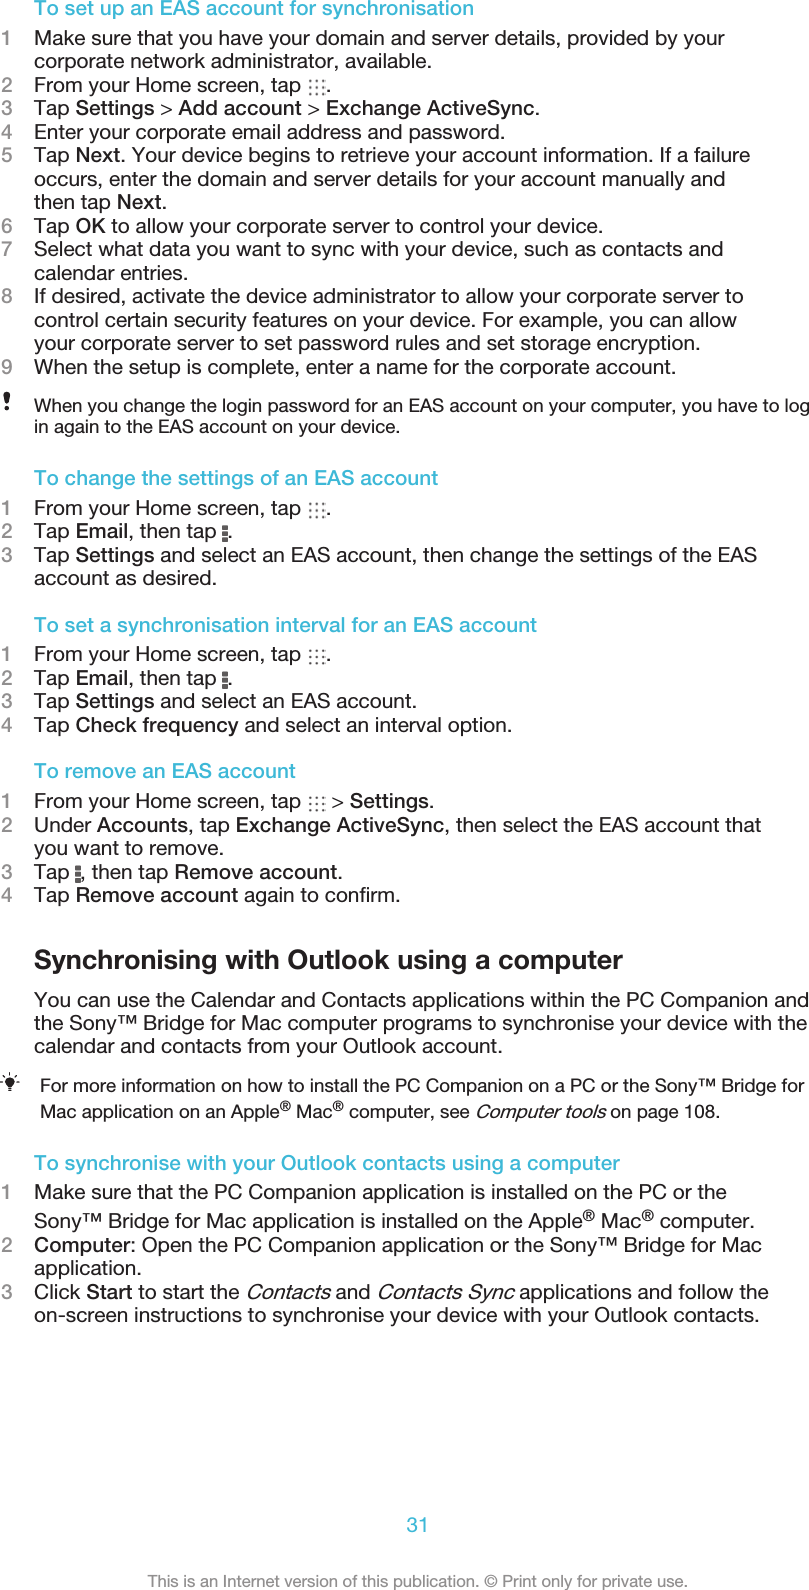 To set up an EAS account for synchronisation1Make sure that you have your domain and server details, provided by yourcorporate network administrator, available.2From your Home screen, tap  .3Tap Settings &gt; Add account &gt; Exchange ActiveSync.4Enter your corporate email address and password.5Tap Next. Your device begins to retrieve your account information. If a failureoccurs, enter the domain and server details for your account manually andthen tap Next.6Tap OK to allow your corporate server to control your device.7Select what data you want to sync with your device, such as contacts andcalendar entries.8If desired, activate the device administrator to allow your corporate server tocontrol certain security features on your device. For example, you can allowyour corporate server to set password rules and set storage encryption.9When the setup is complete, enter a name for the corporate account.When you change the login password for an EAS account on your computer, you have to login again to the EAS account on your device.To change the settings of an EAS account1From your Home screen, tap  .2Tap Email, then tap  .3Tap Settings and select an EAS account, then change the settings of the EASaccount as desired.To set a synchronisation interval for an EAS account1From your Home screen, tap  .2Tap Email, then tap  .3Tap Settings and select an EAS account.4Tap Check frequency and select an interval option.To remove an EAS account1From your Home screen, tap   &gt; Settings.2Under Accounts, tap Exchange ActiveSync, then select the EAS account thatyou want to remove.3Tap  , then tap Remove account.4Tap Remove account again to conﬁrm.Synchronising with Outlook using a computerYou can use the Calendar and Contacts applications within the PC Companion andthe Sony™ Bridge for Mac computer programs to synchronise your device with thecalendar and contacts from your Outlook account.For more information on how to install the PC Companion on a PC or the Sony™ Bridge forMac application on an Apple® Mac® computer, see Computer tools on page 108.To synchronise with your Outlook contacts using a computer1Make sure that the PC Companion application is installed on the PC or theSony™ Bridge for Mac application is installed on the Apple® Mac® computer.2Computer: Open the PC Companion application or the Sony™ Bridge for Macapplication.3Click Start to start the Contacts and Contacts Sync applications and follow theon-screen instructions to synchronise your device with your Outlook contacts.31This is an Internet version of this publication. © Print only for private use.